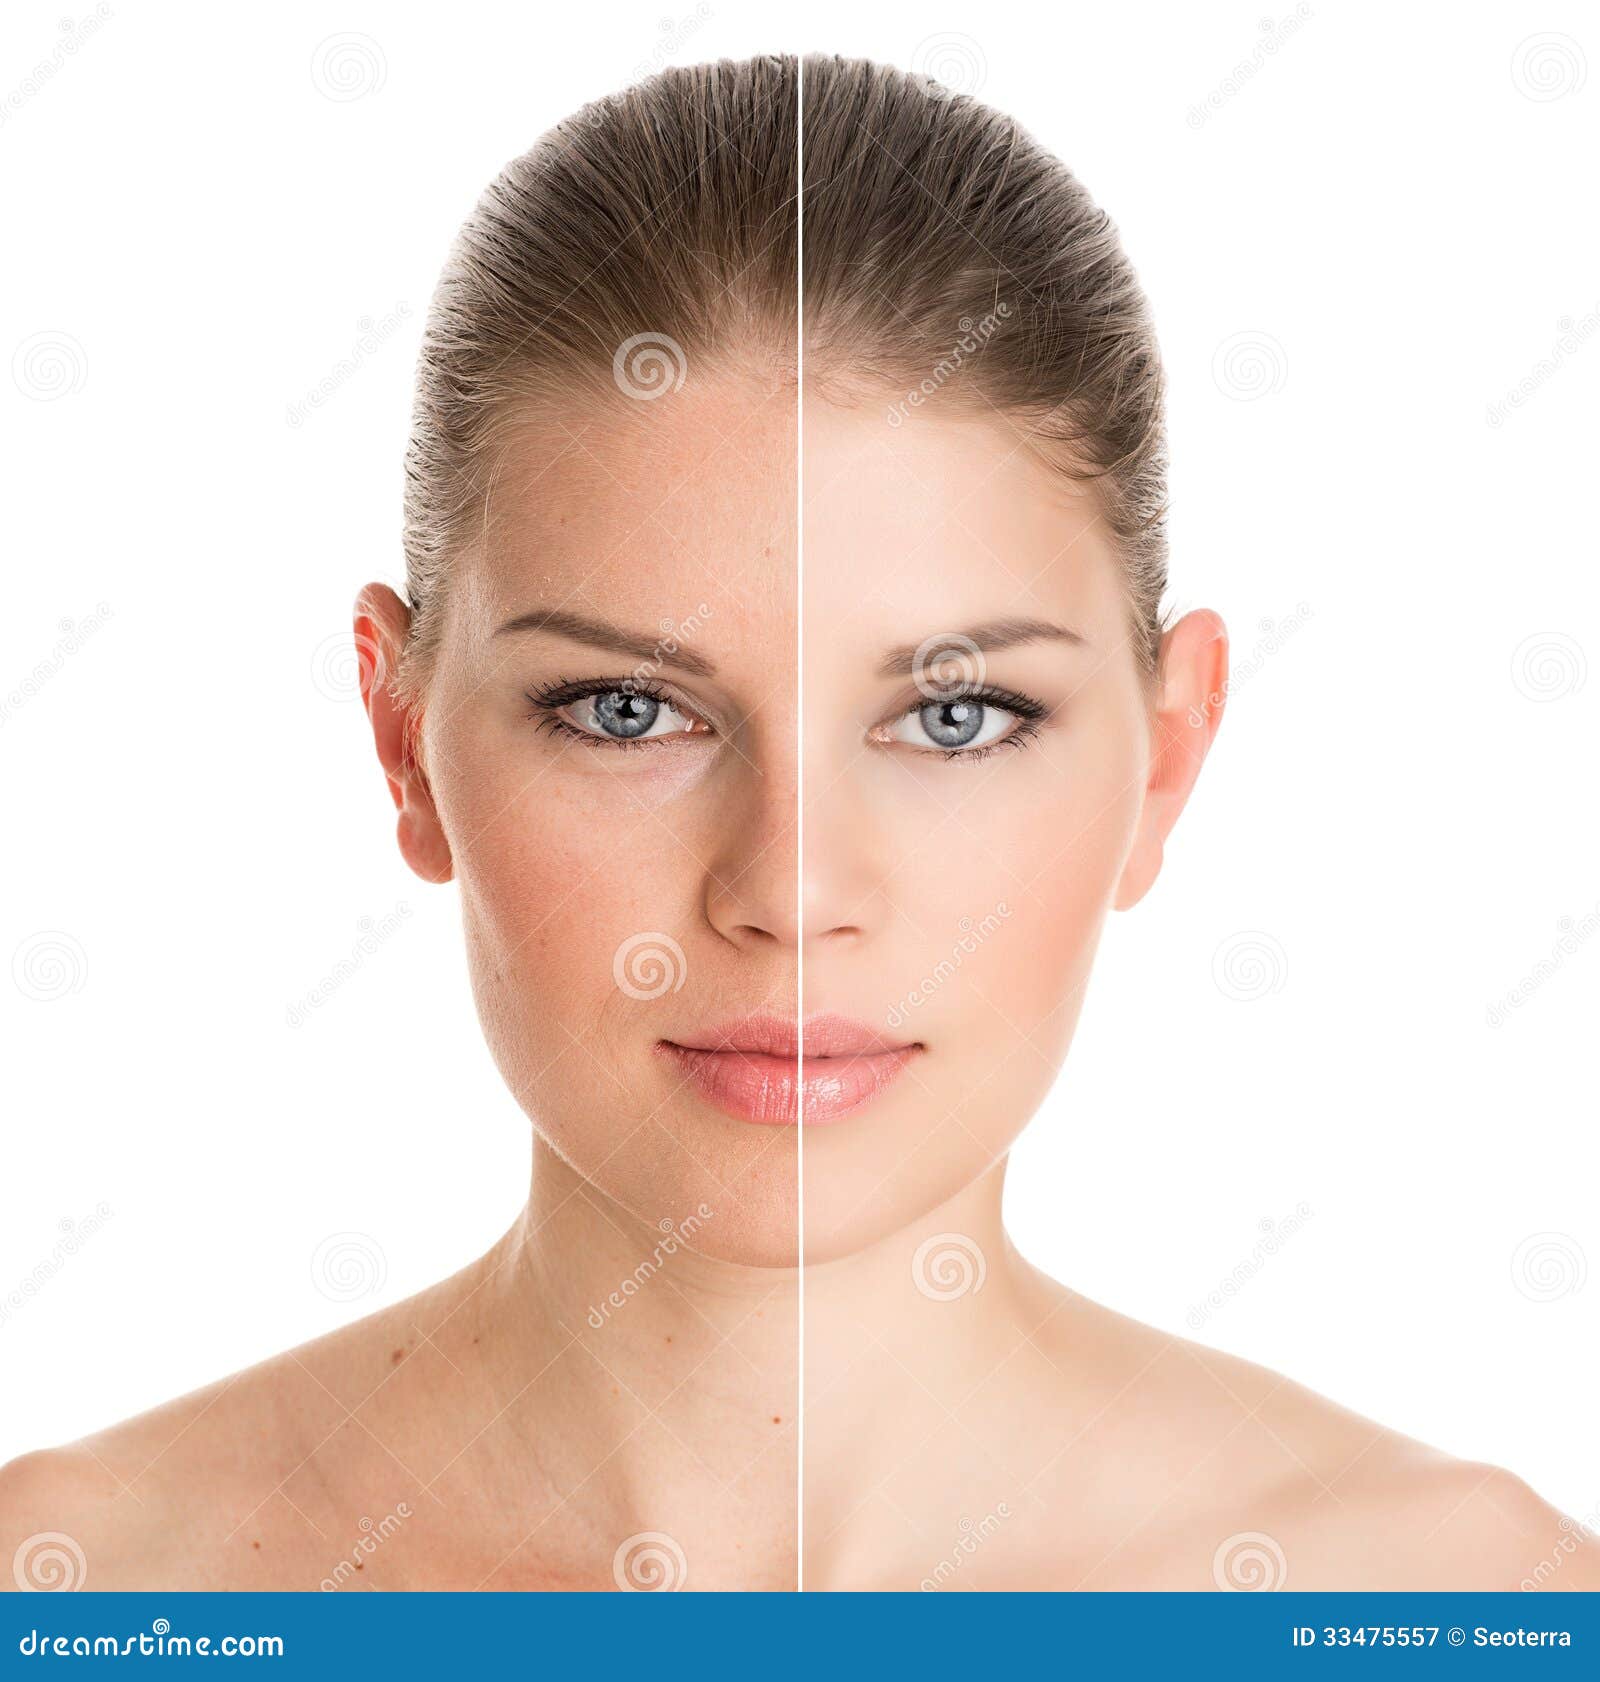 before and after cosmetic operation